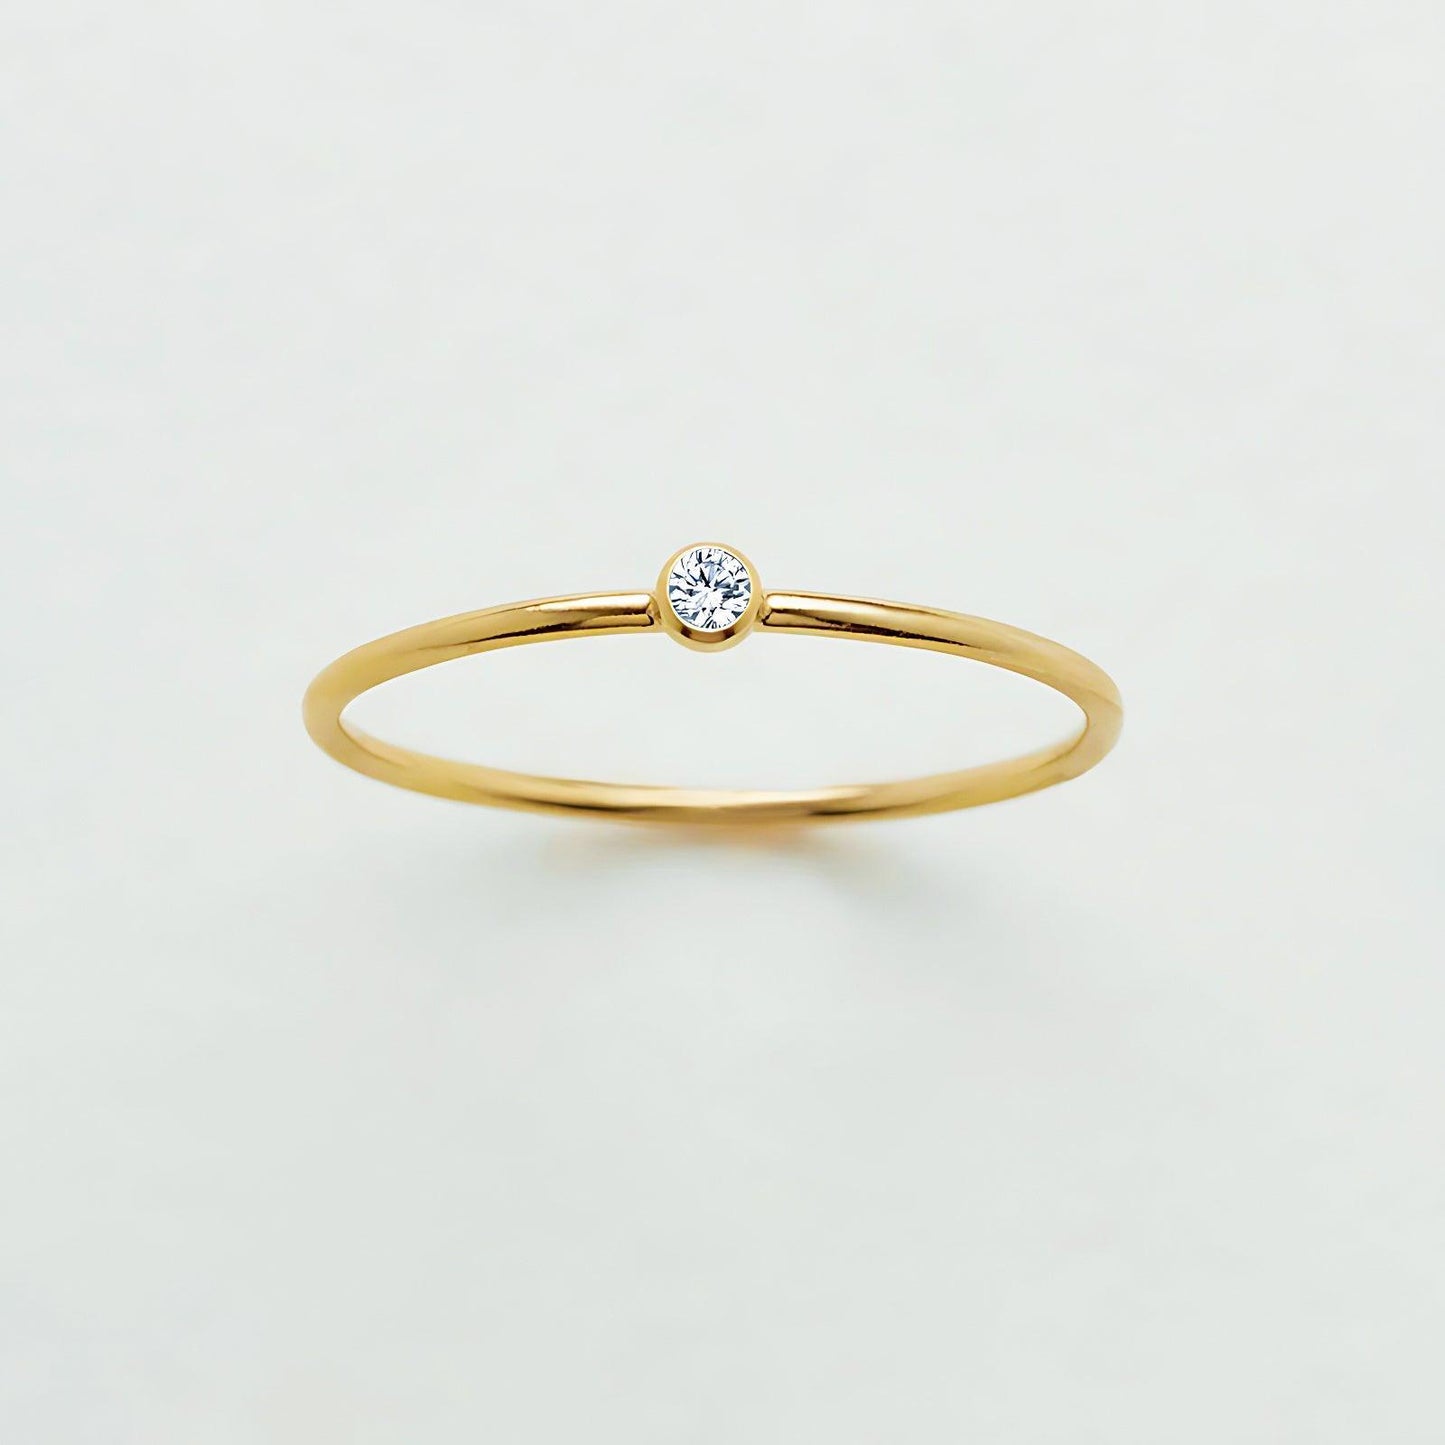 April Birthstone Cute Ring for Christmas 2023 | April Birthstone Cute Ring - undefined | April Birthstone, April birthstone is Diamond, Birthstone Ring, cute ring, S925 Silver Vintage Cute Ring, Sterling Silver s925 cute Ring | From Hunny Life | hunnylife.com